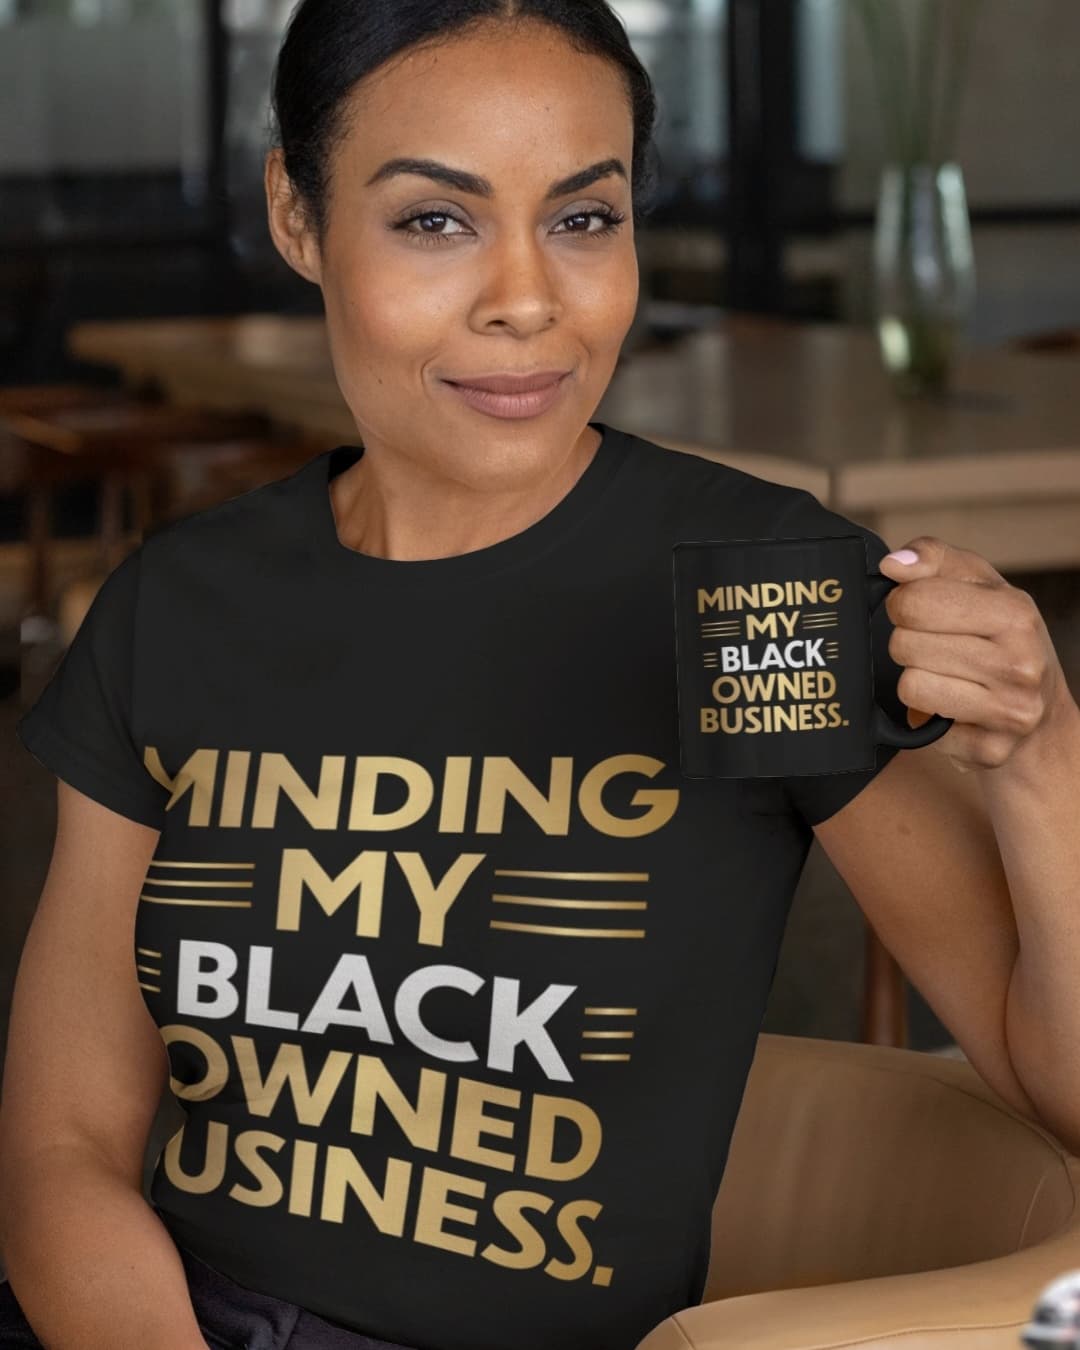 Minding My Black Owned Business T-Shirt